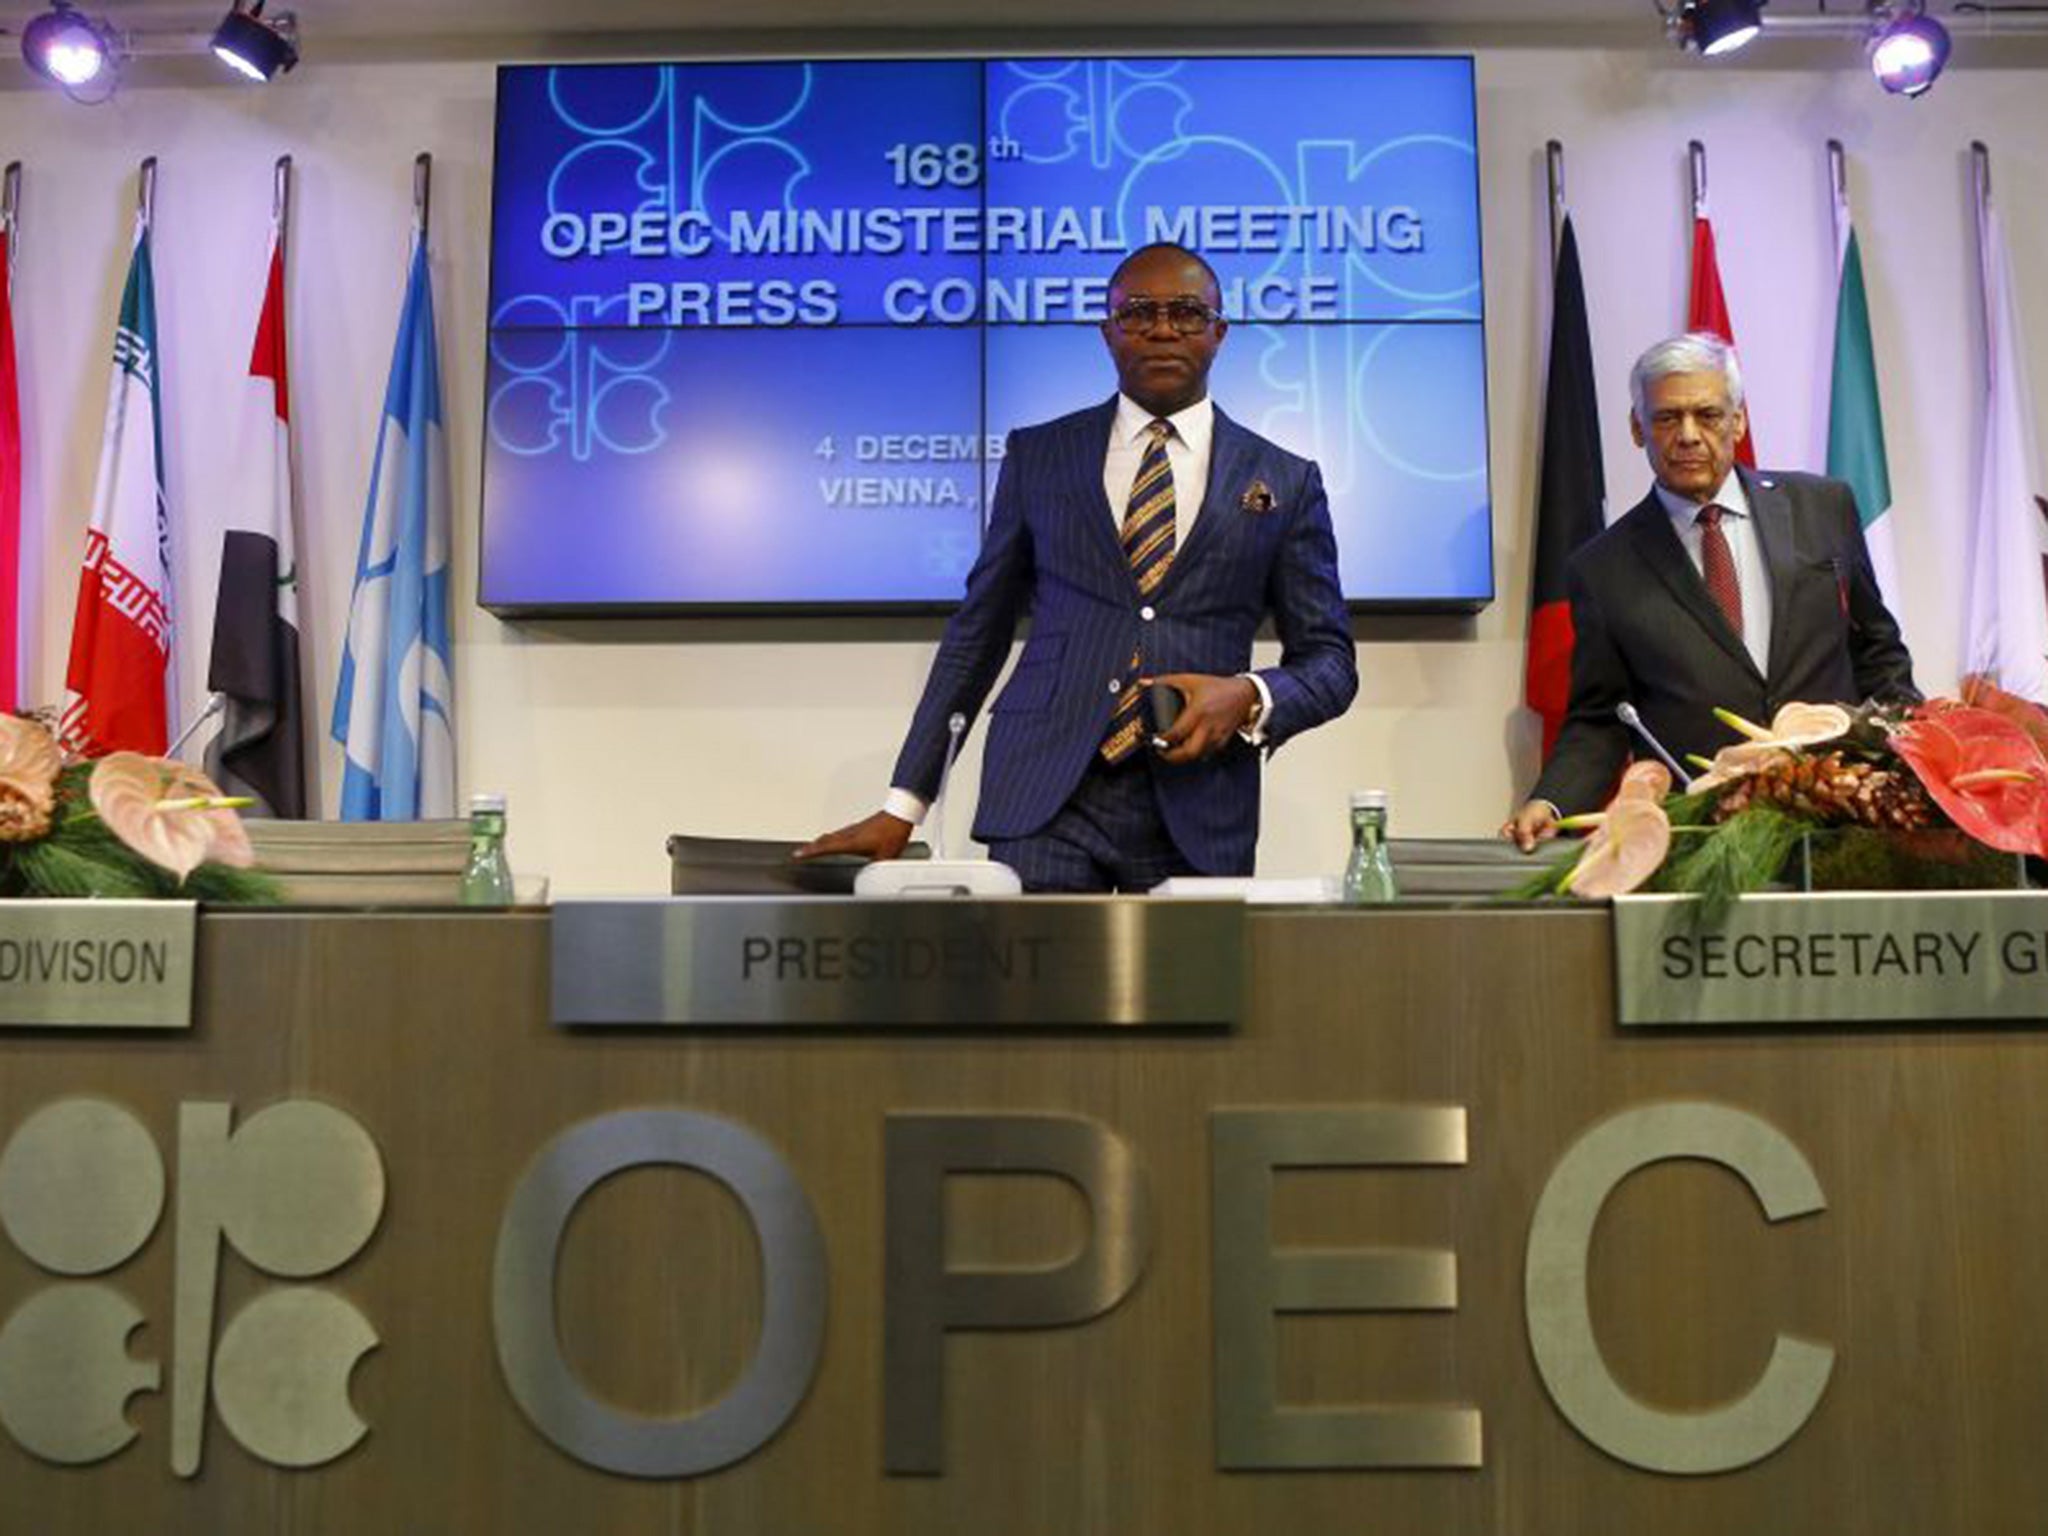 Nigeria's Oil Minister and OPEC president Emmanuel Ibe Kachikwu (L) and OPEC secretary general Abdullah al-Badri arrive for a news conference